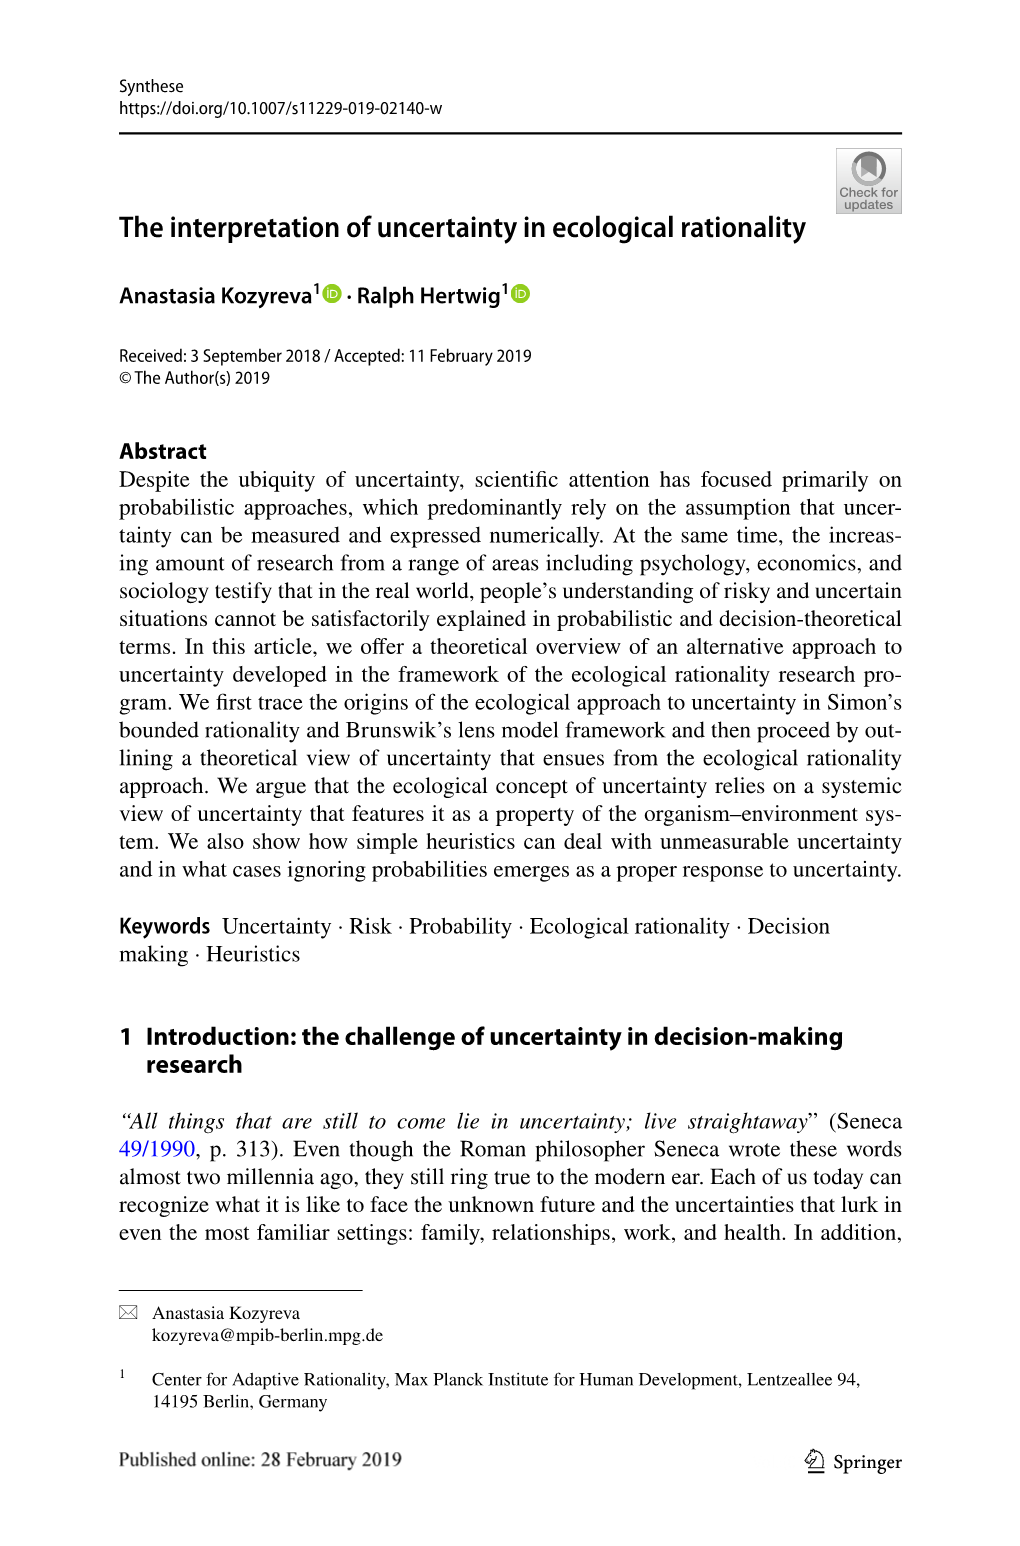 The Interpretation of Uncertainty in Ecological Rationality